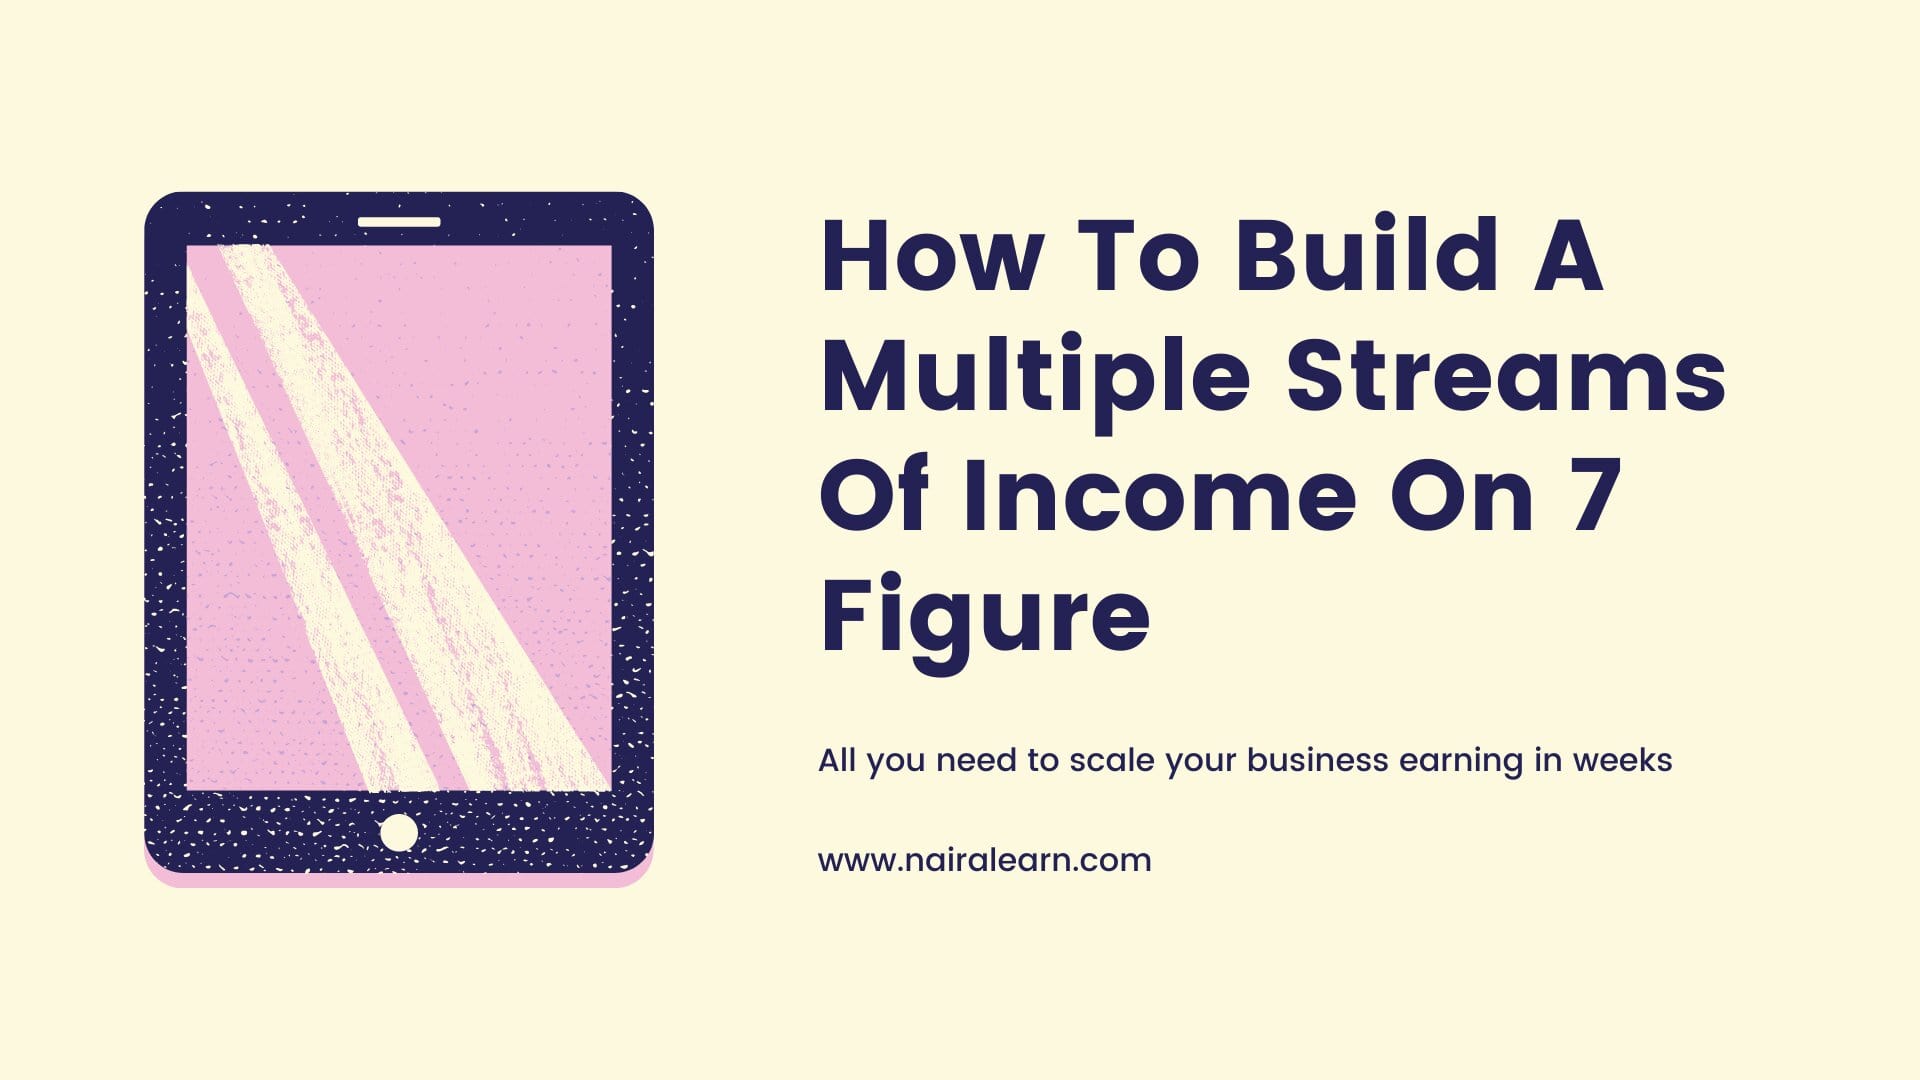 How To Build A Multiple Streams Of Income On 7 Figure